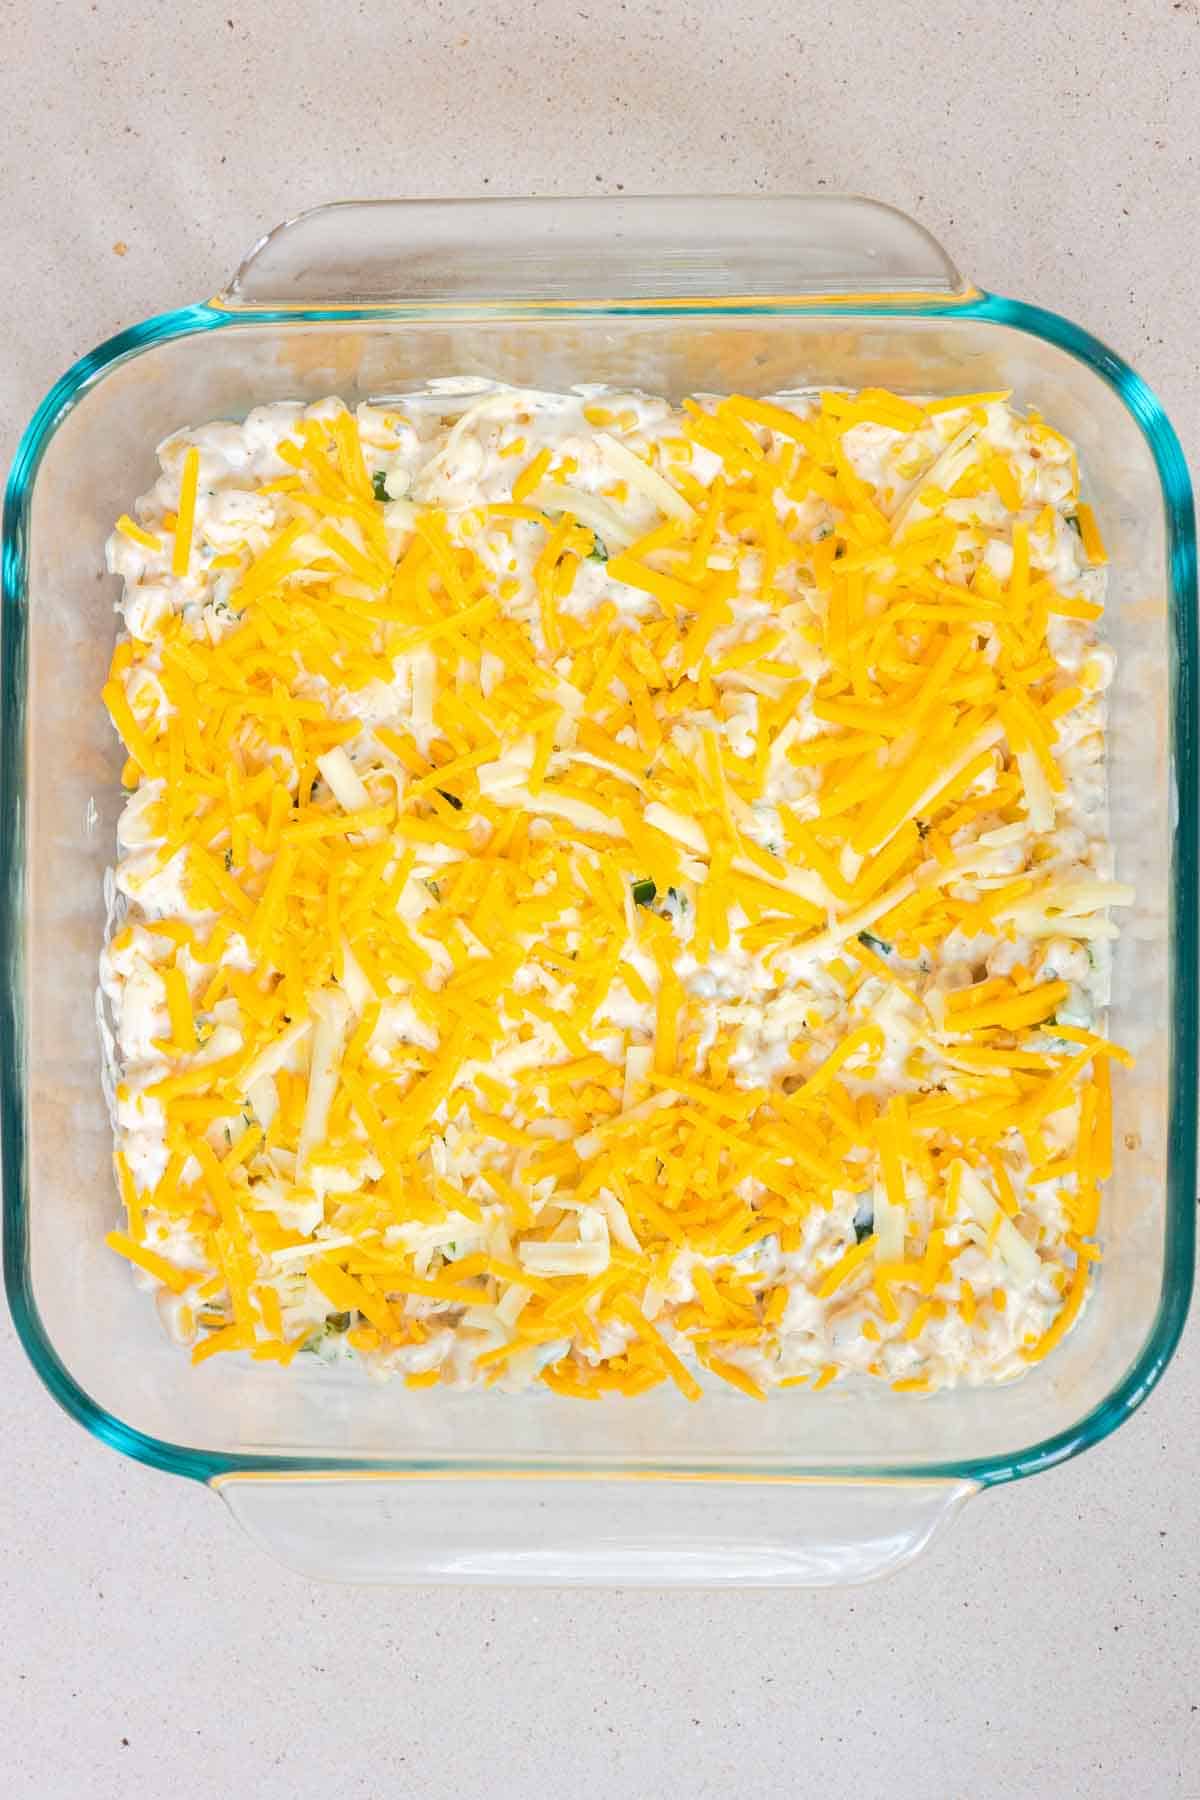 Shredded cheese is sprinkled evening over the top of the casserole.